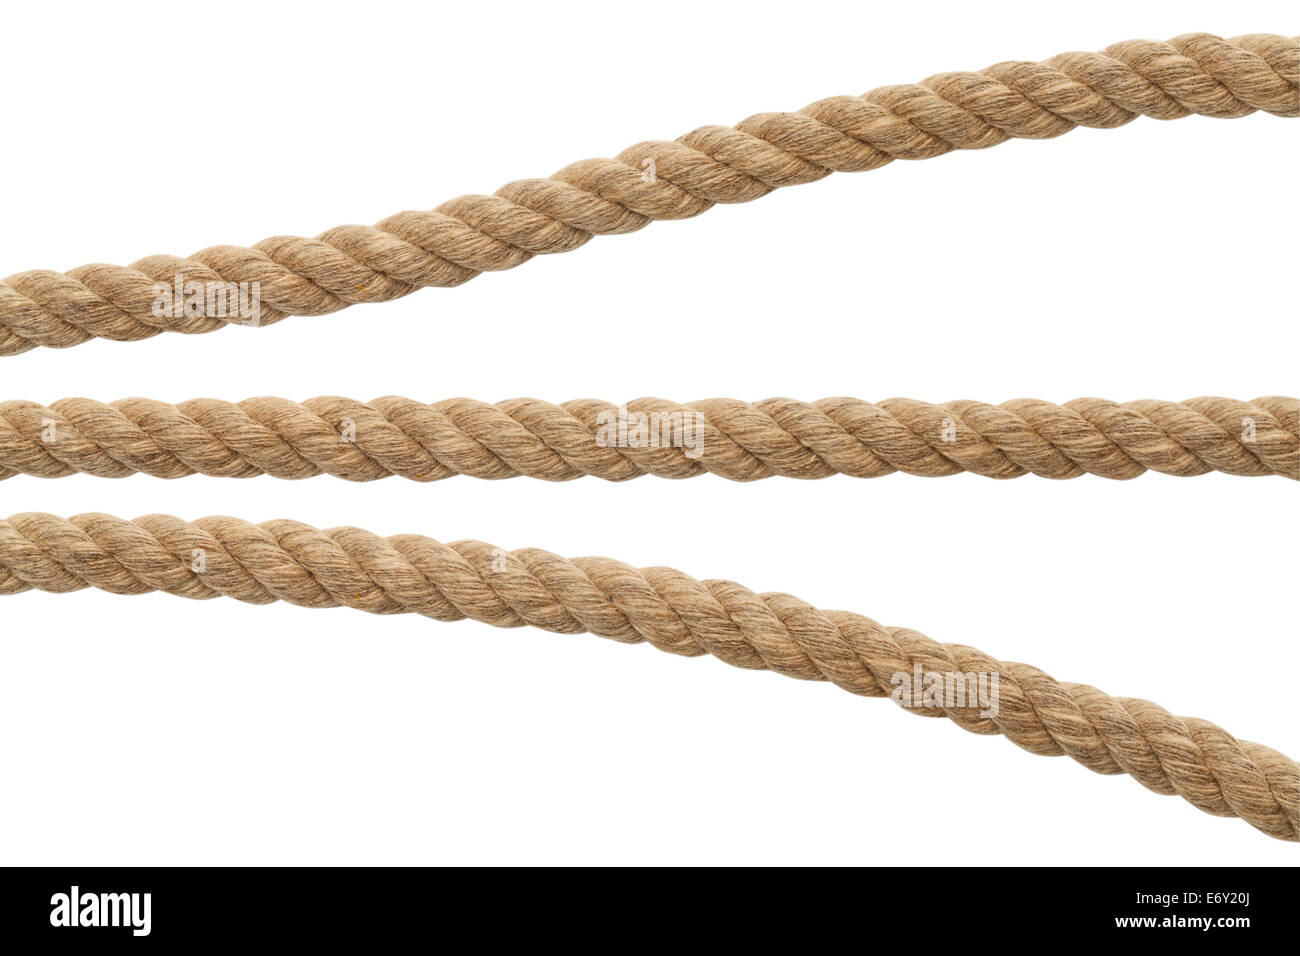 Segments of Brown Rope Isolated on White Background. Stock Photo